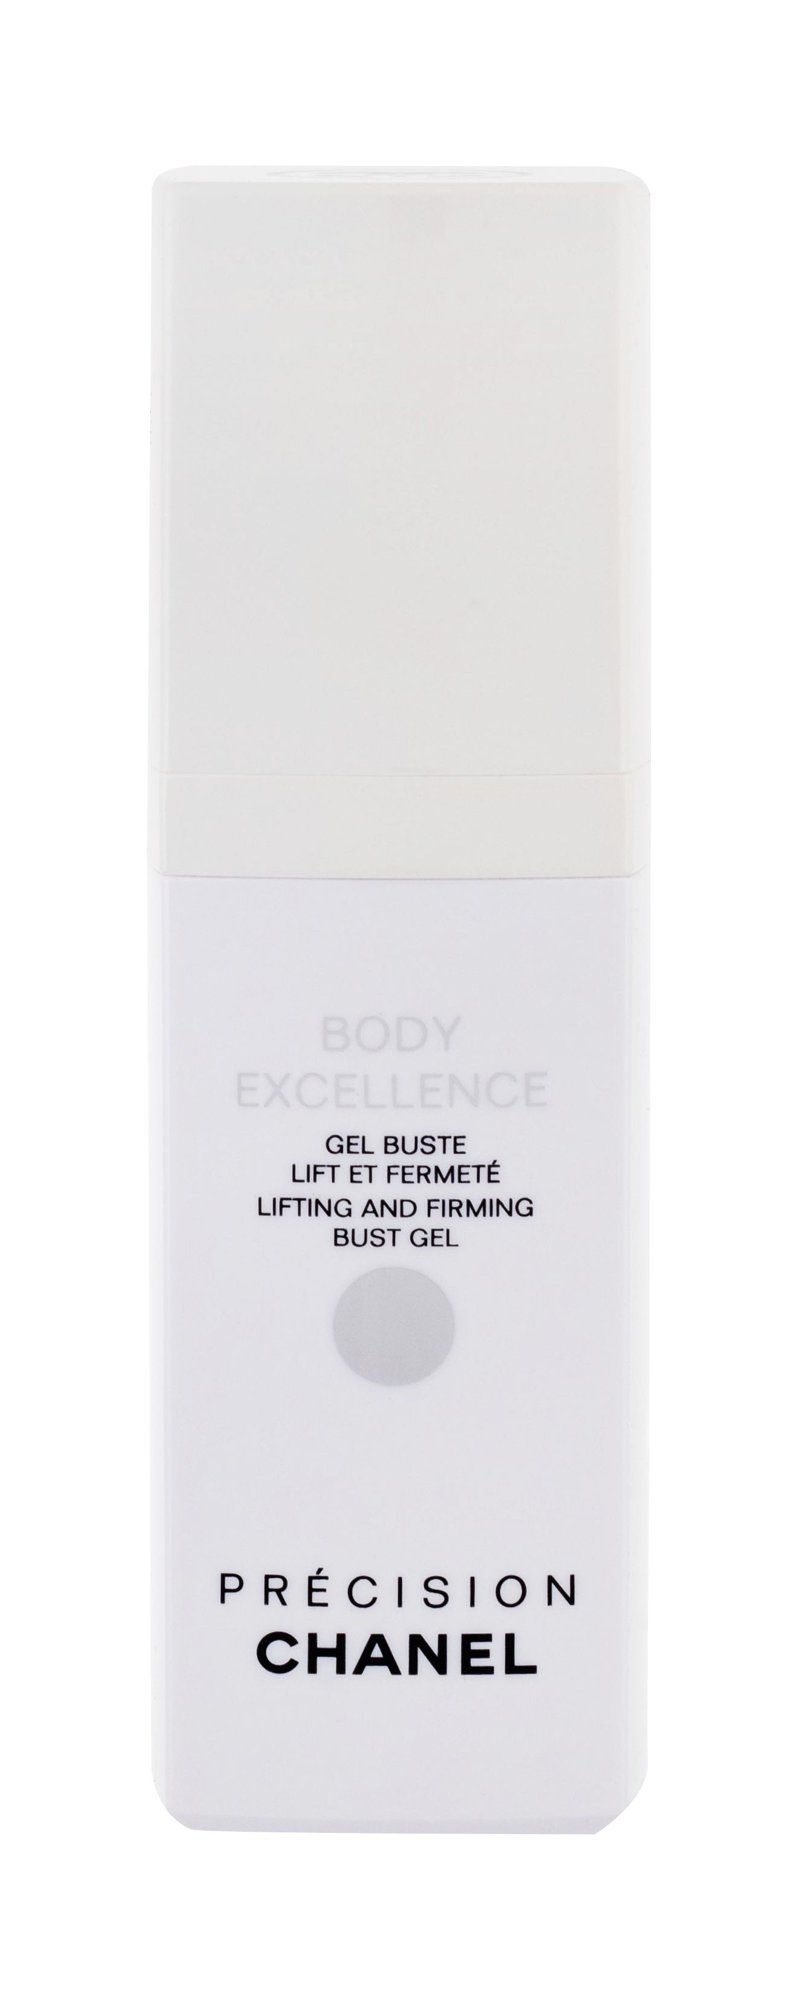 Chanel Body Excellence Lifting And Firming Bust Gel